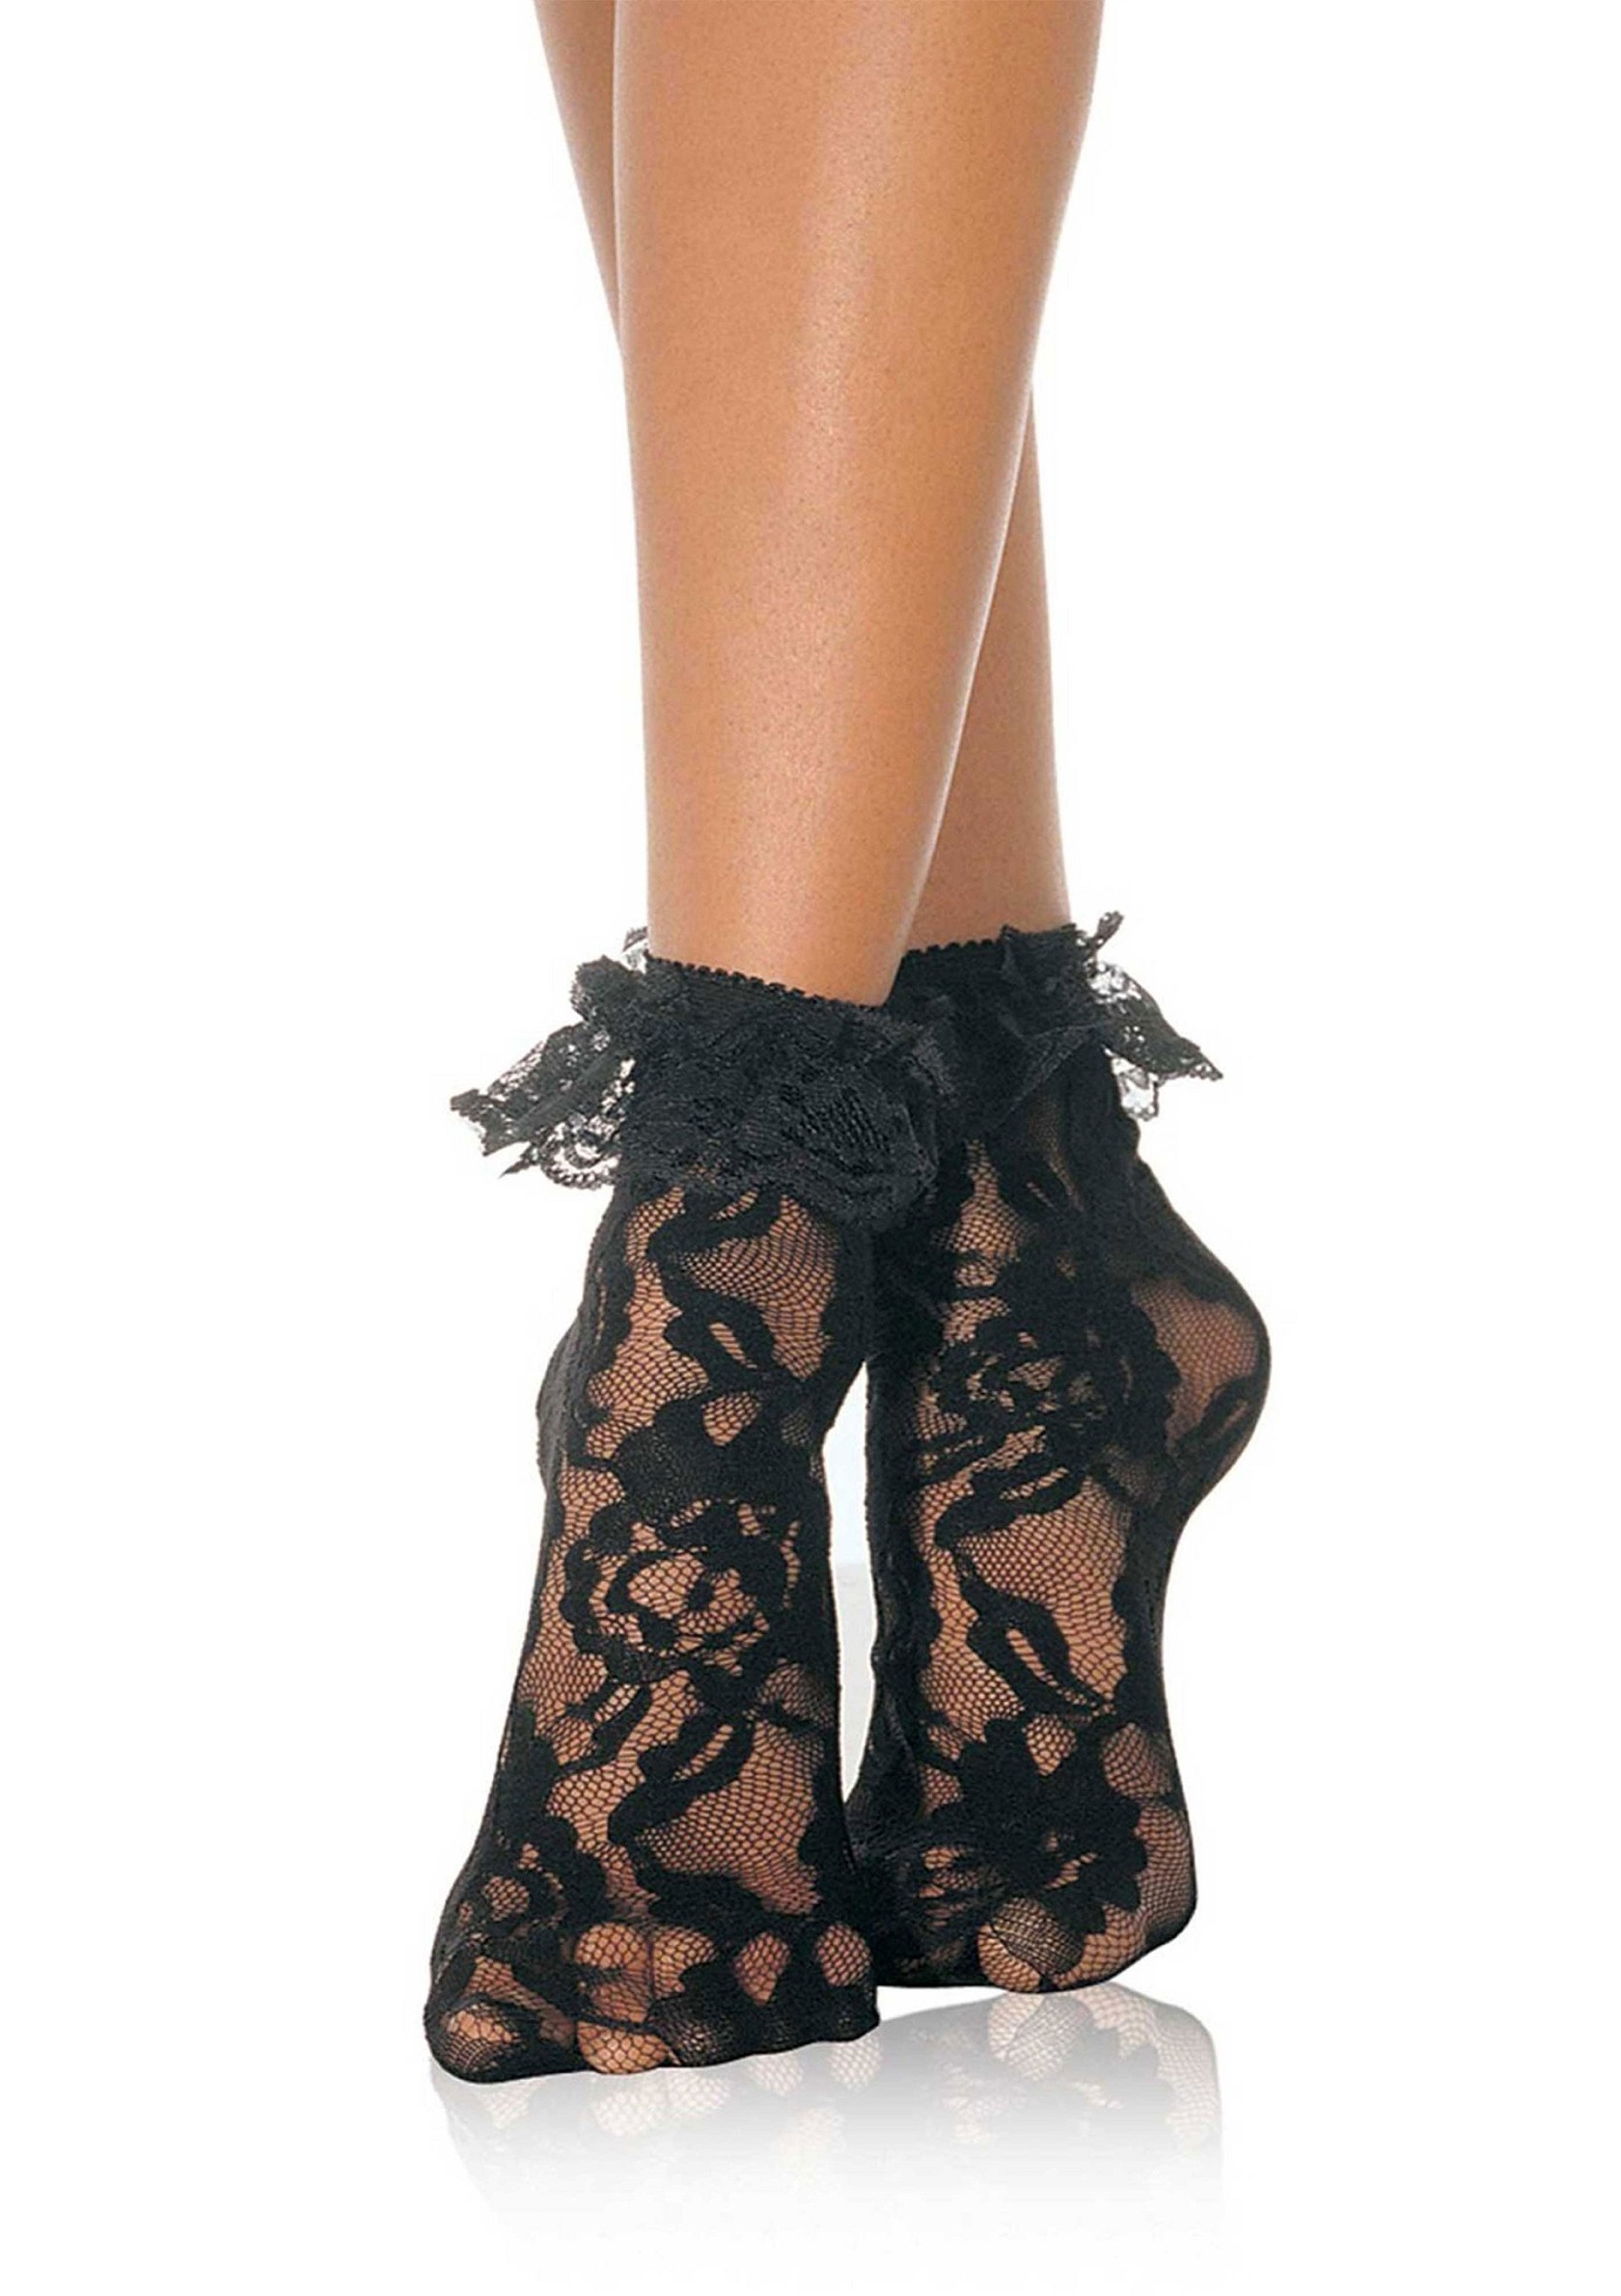 Lace Anklet With Ruffle